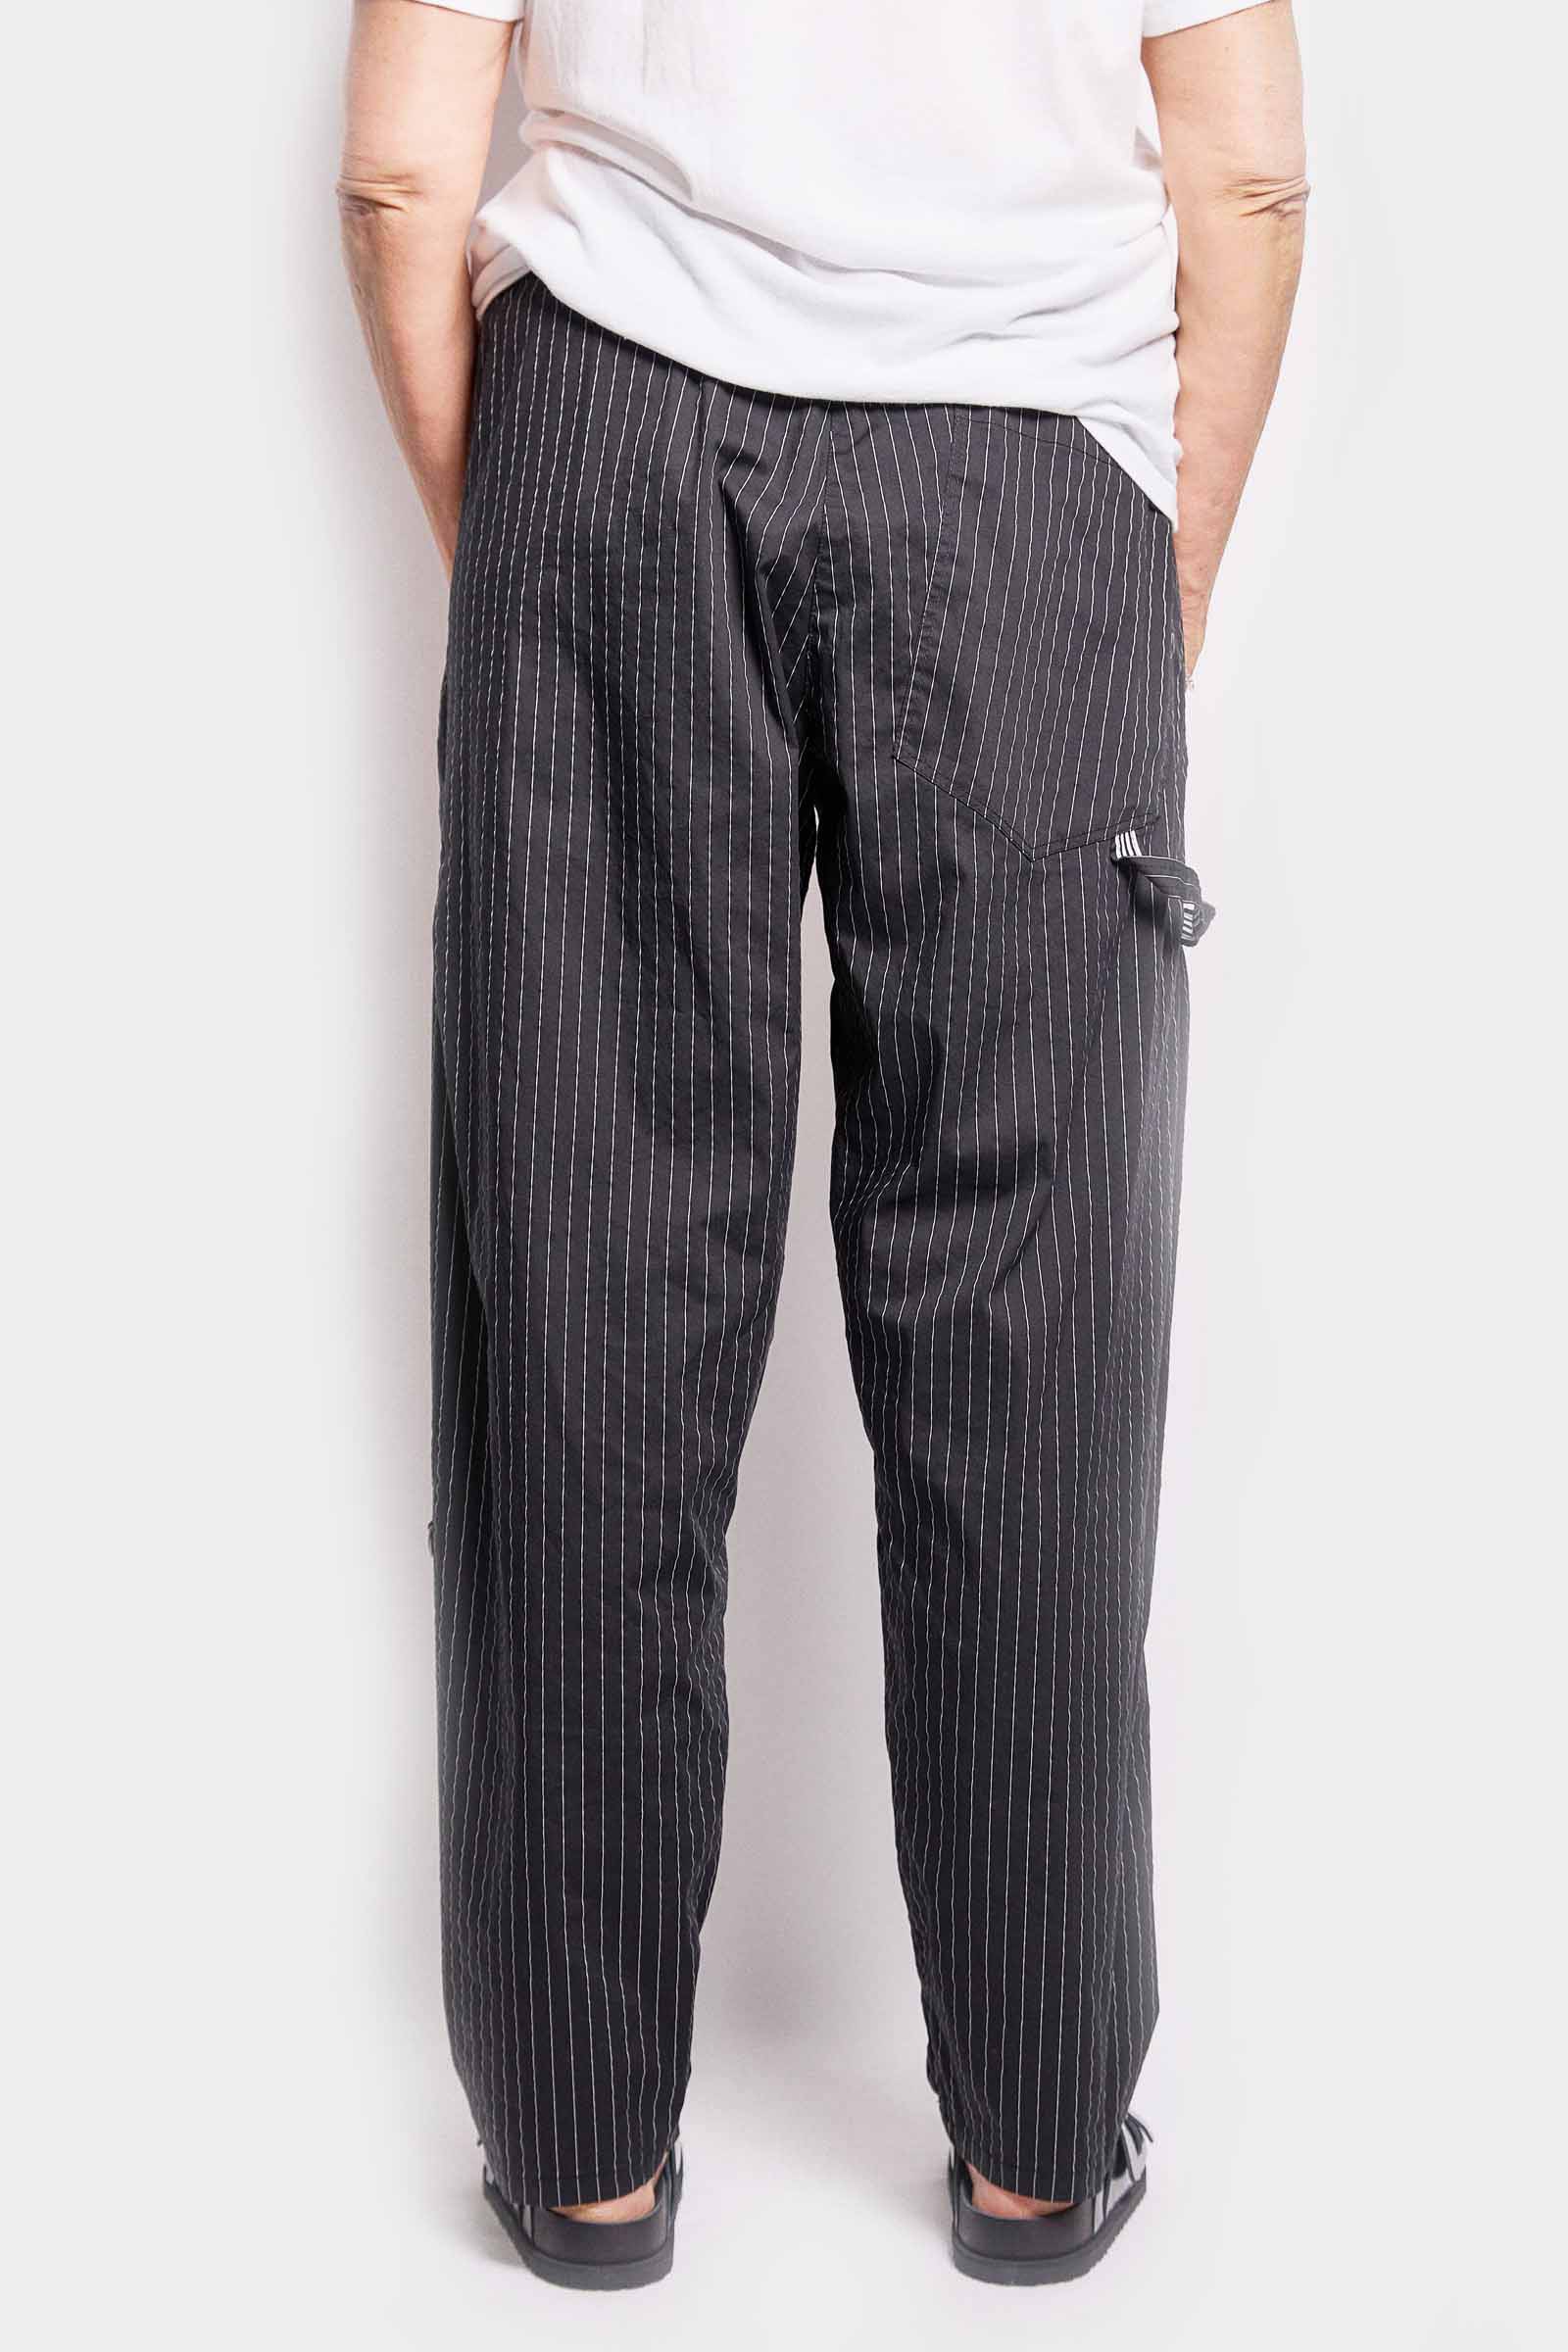 dax black pinstripe pant with ring